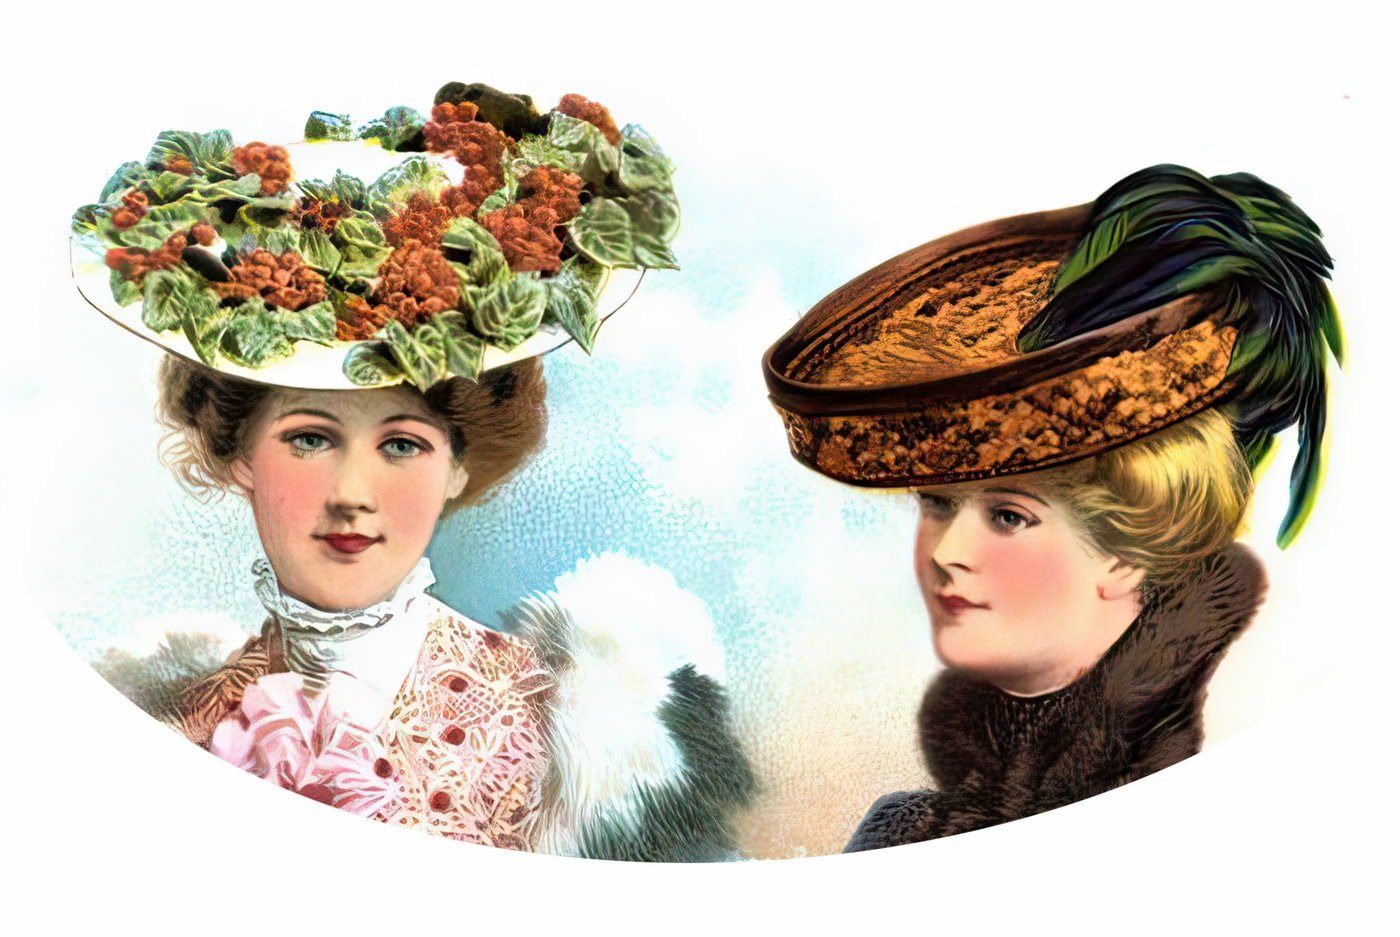 Fashionable vintage womens hats from the turn of the century